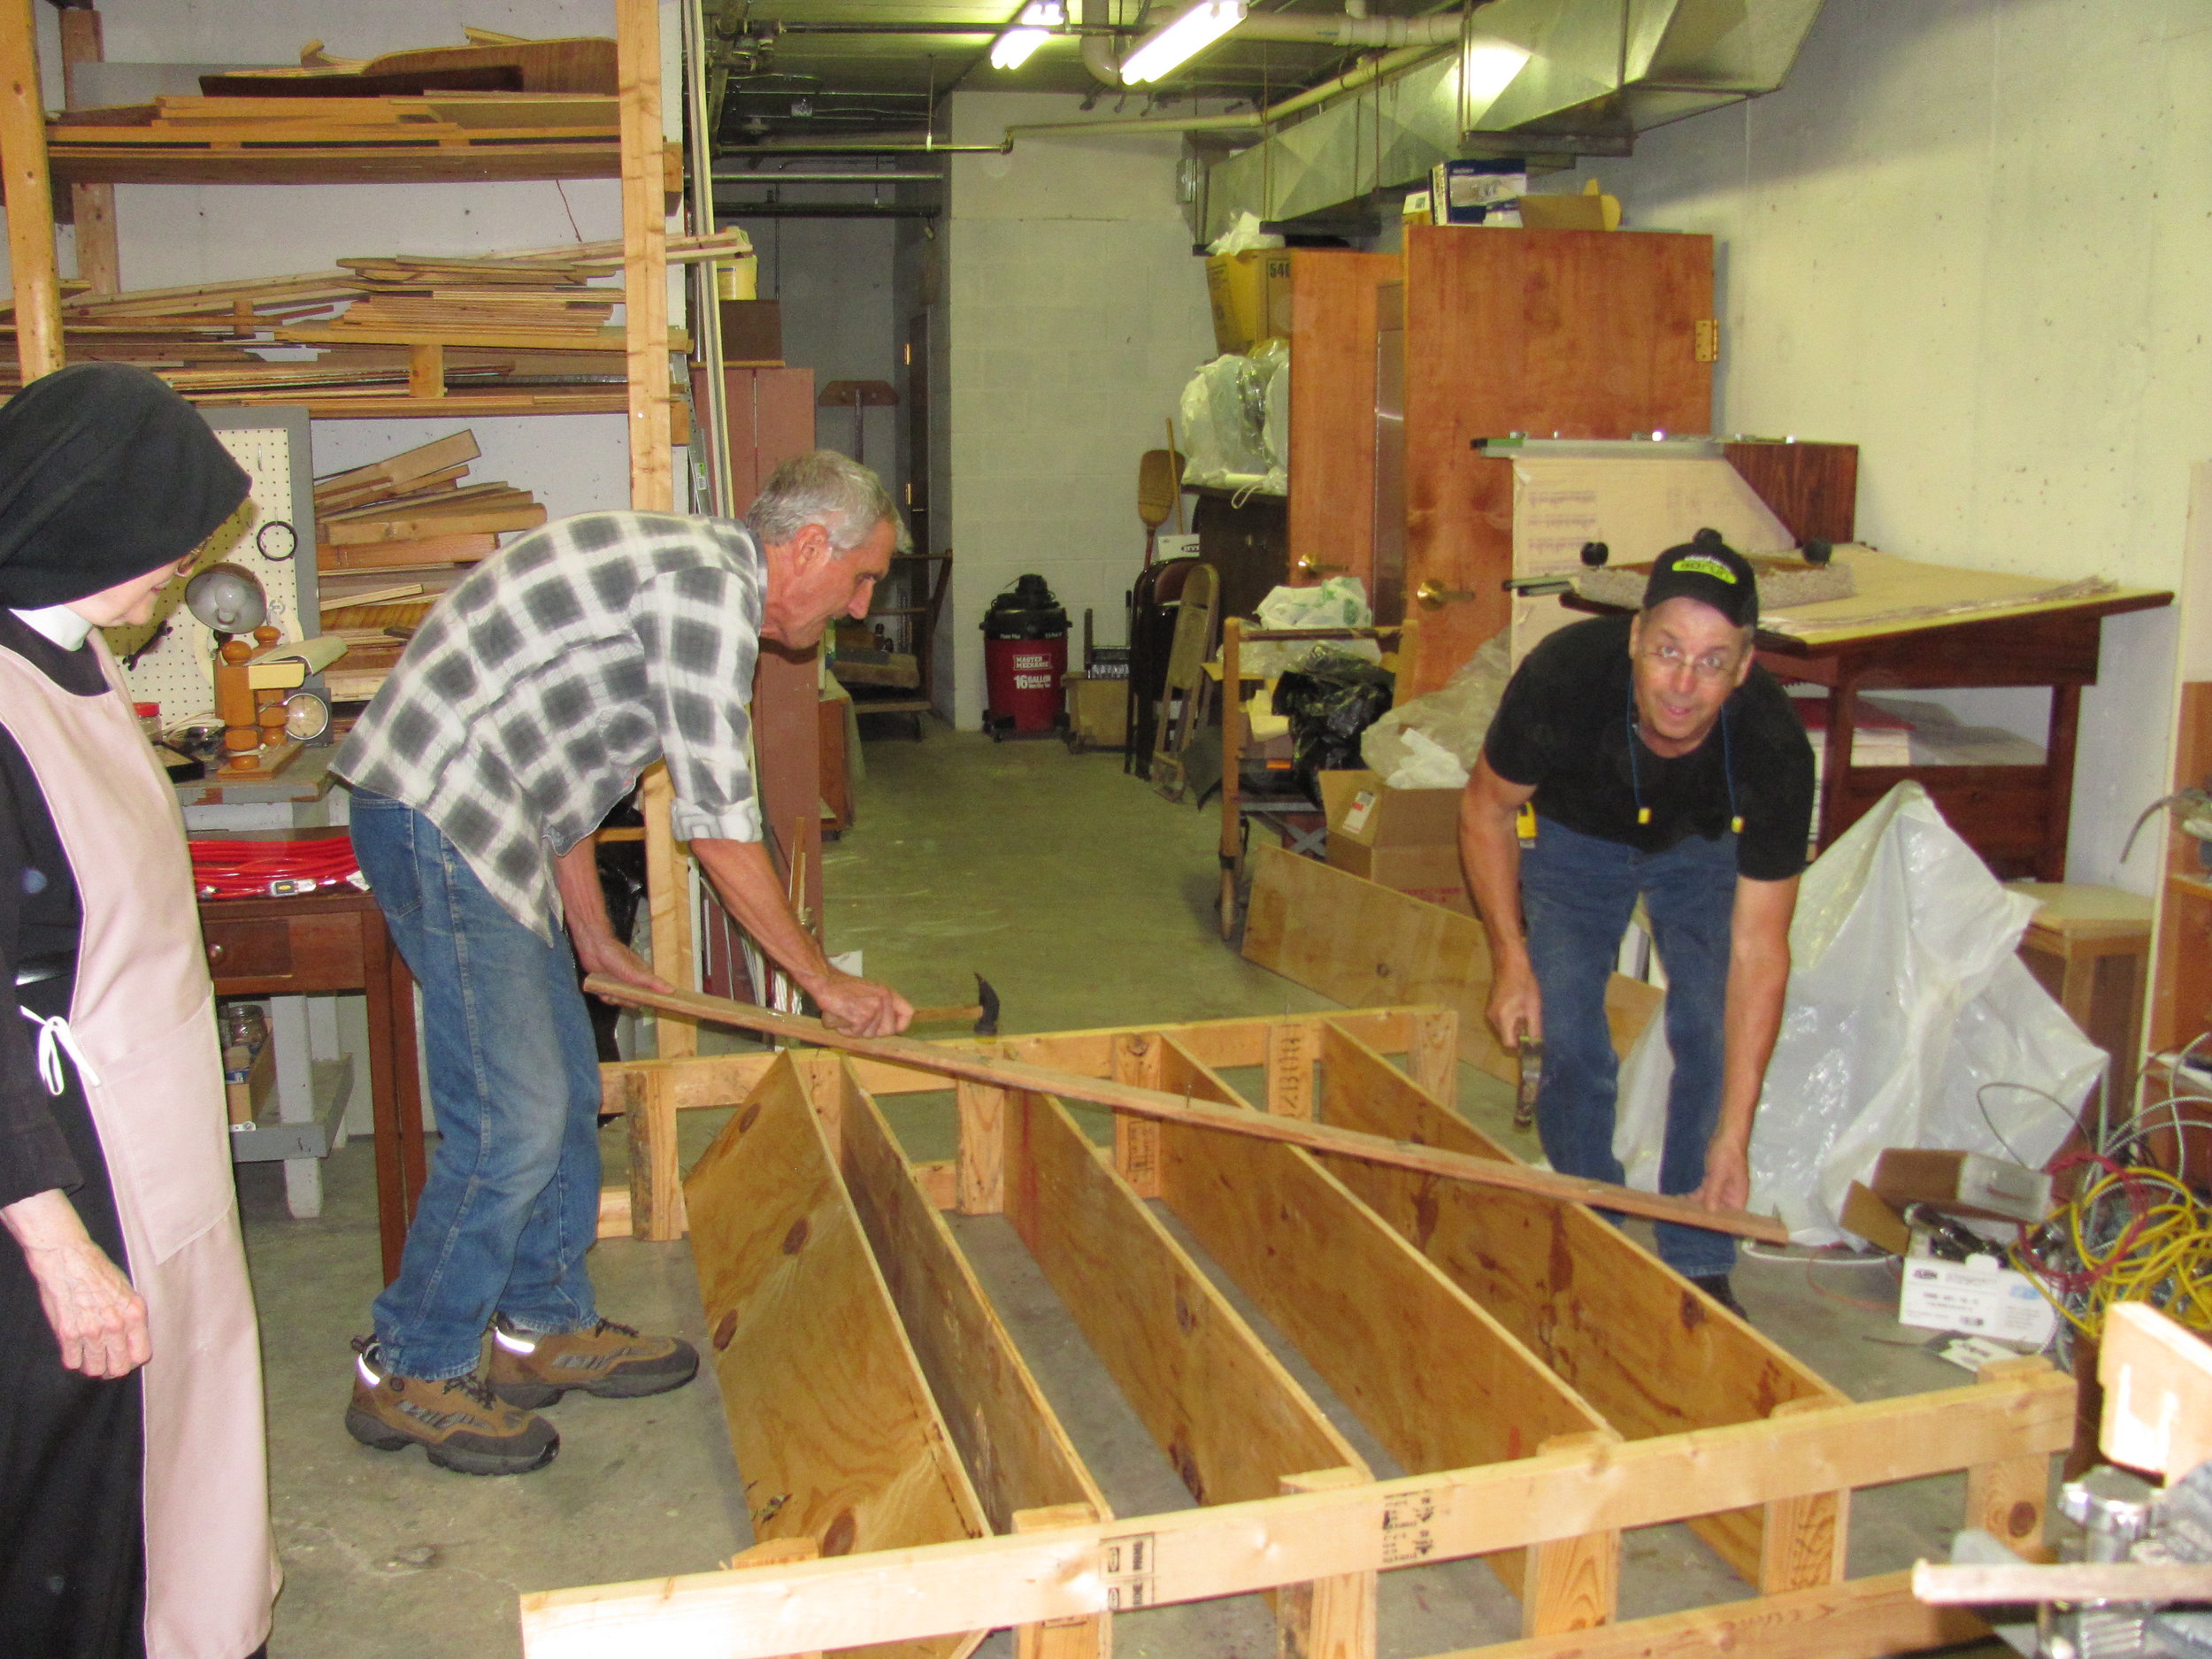 Dwayne and Mike volunteer to build shelving for the Nuns